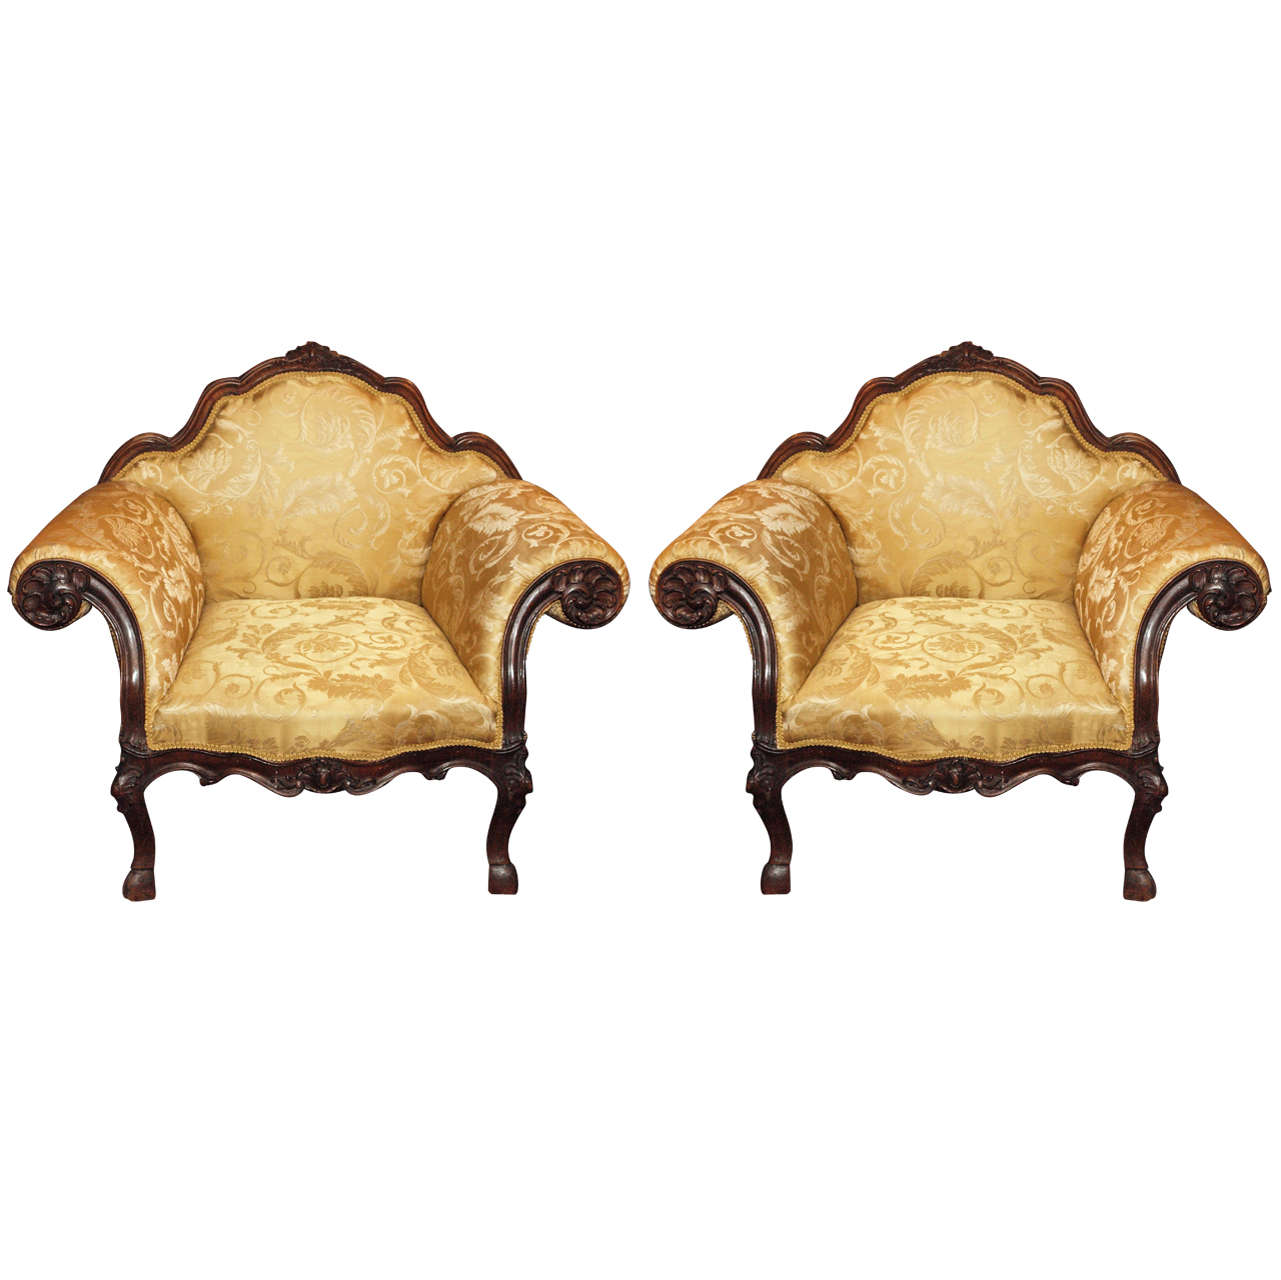 Pair of 18th c. Piedmontese Armchairs For Sale